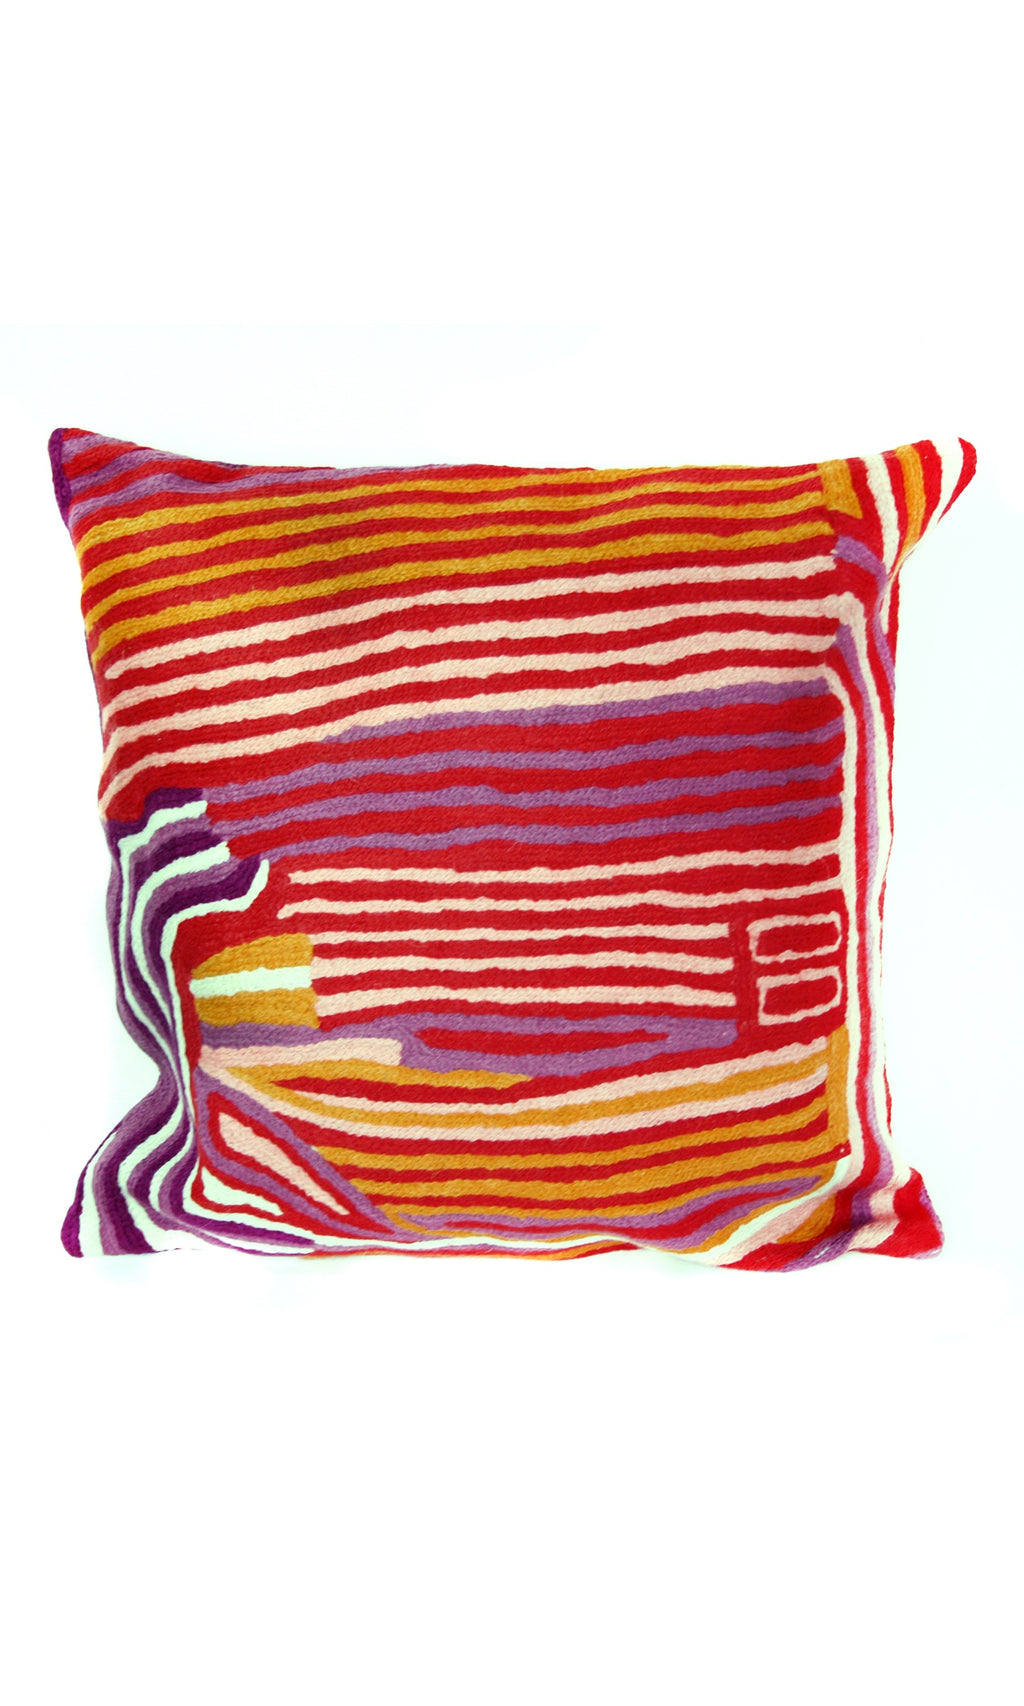 Aboriginal Art Cushion Cover by Mary Anne Nampijinpa Michaels (2)